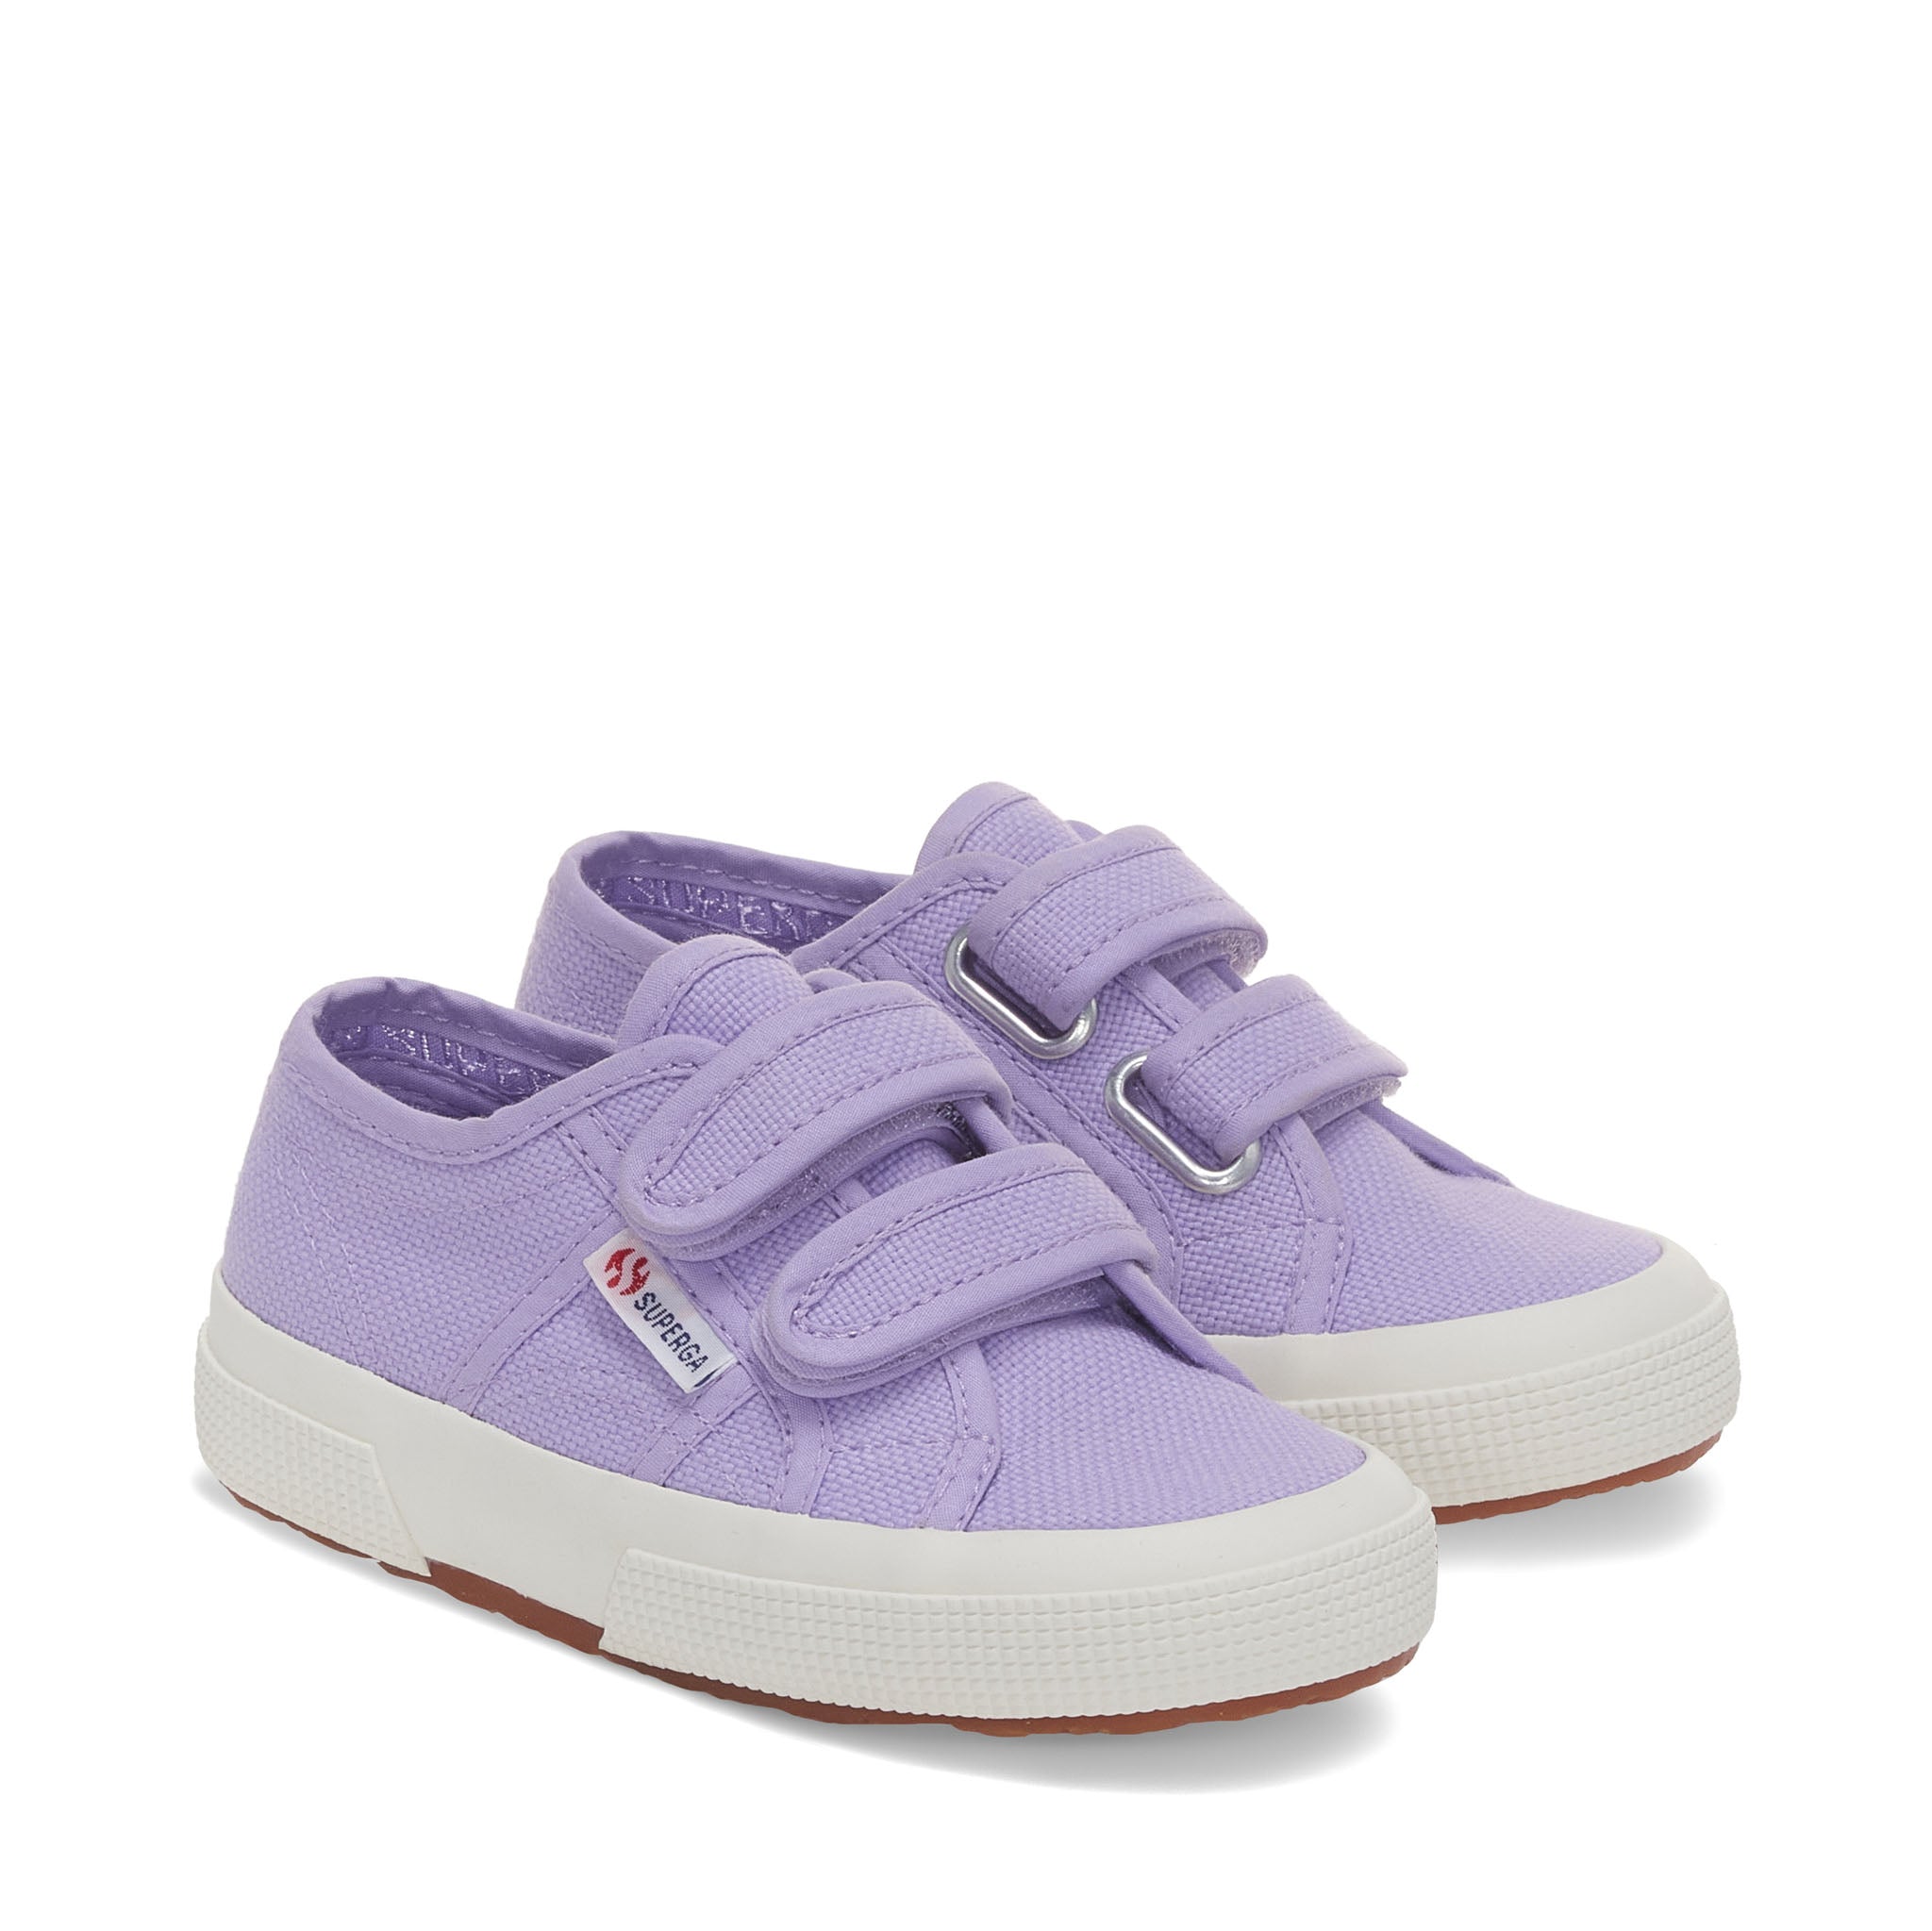 Superga 2750 Kids Cotjstrap Classic Sneakers - Violet Lilac. Front view.